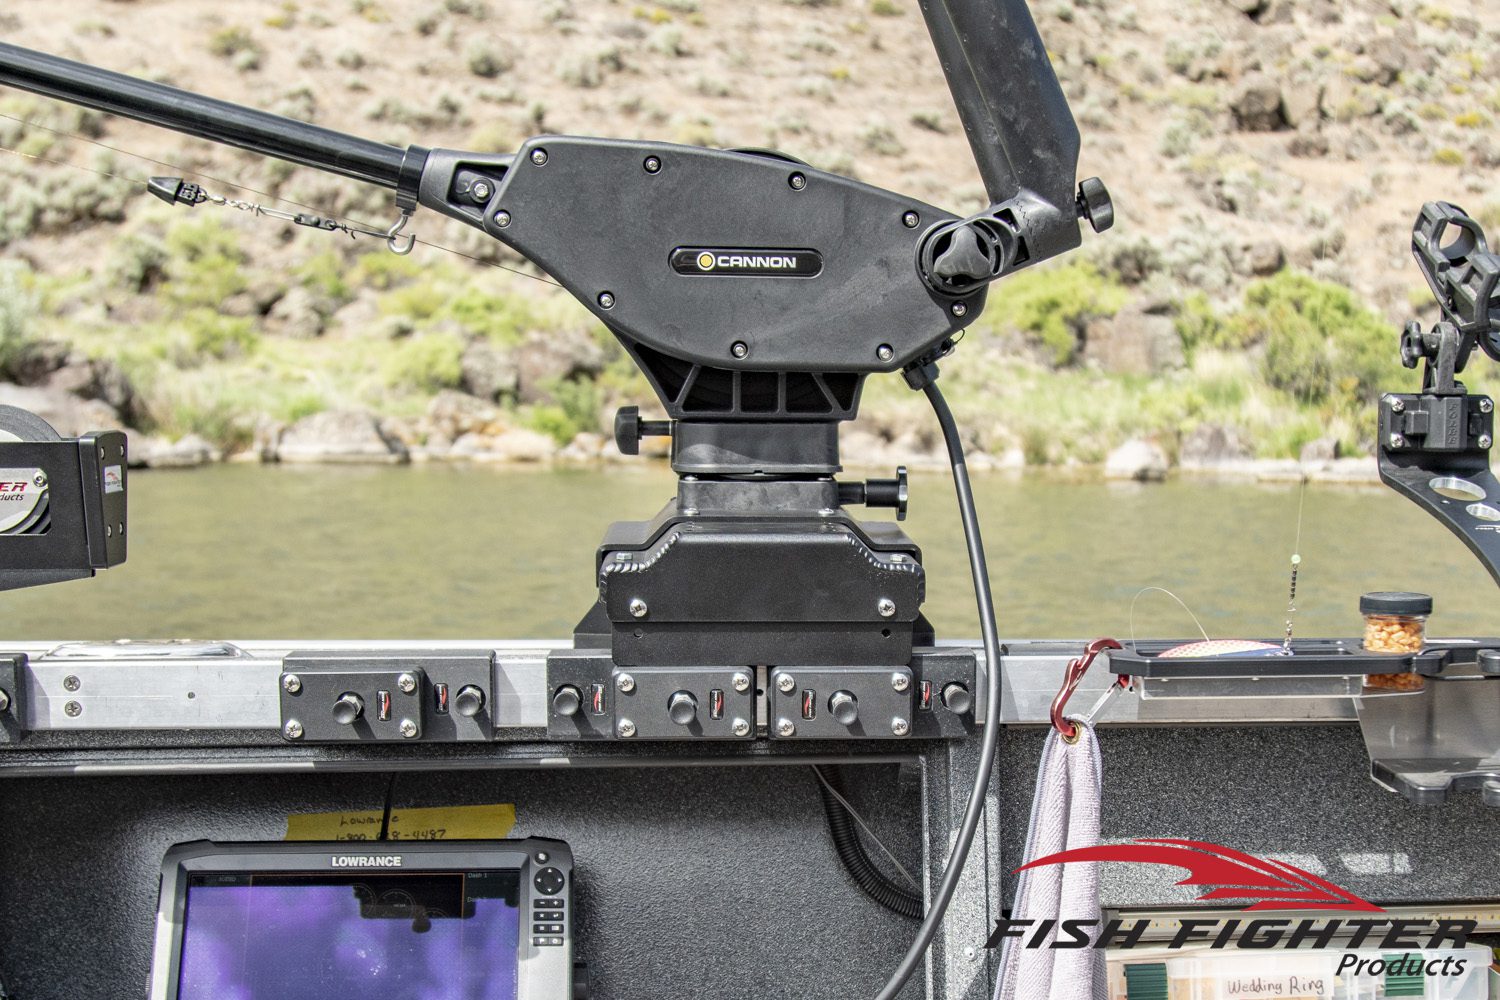 Buy Fishing Downriggers & Outriggers Online from Cannon